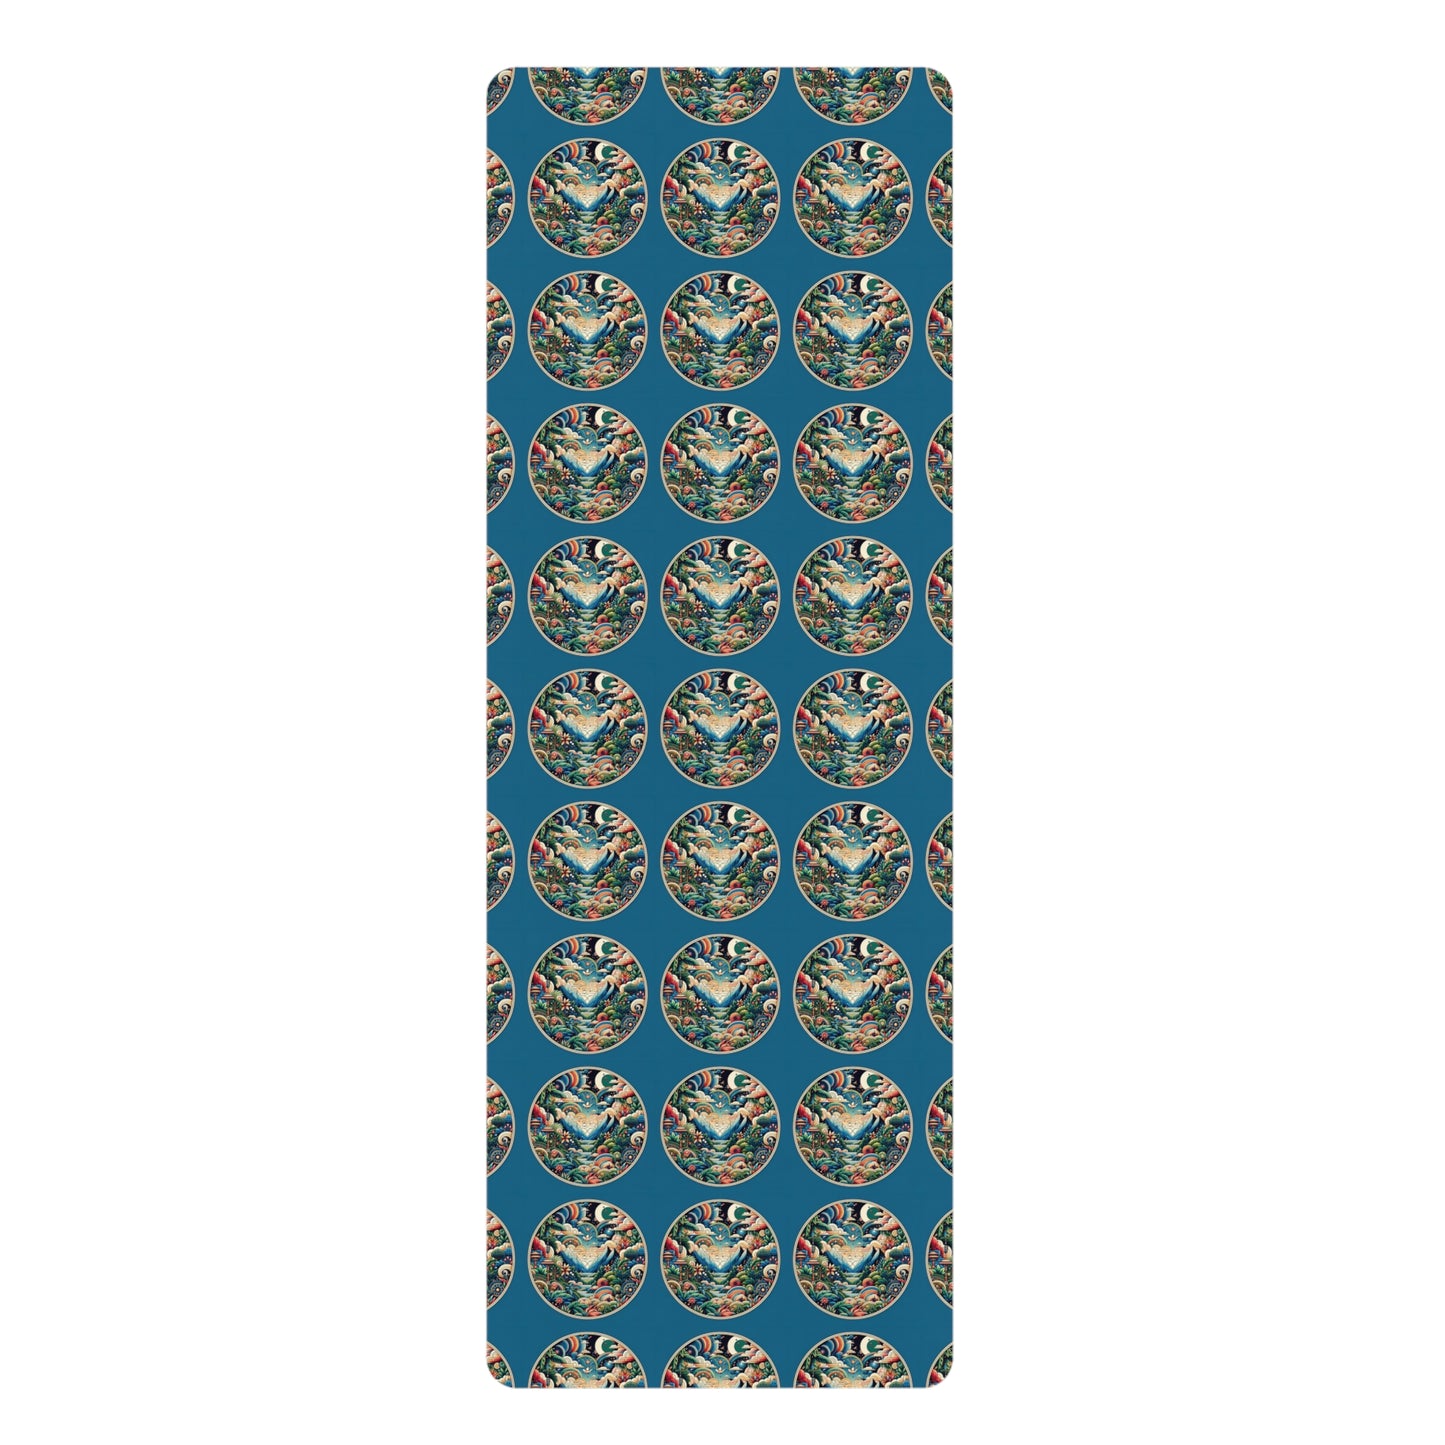 Global Tapestry Yoga Mat: Exquisite Microfiber with World-Inspired Design